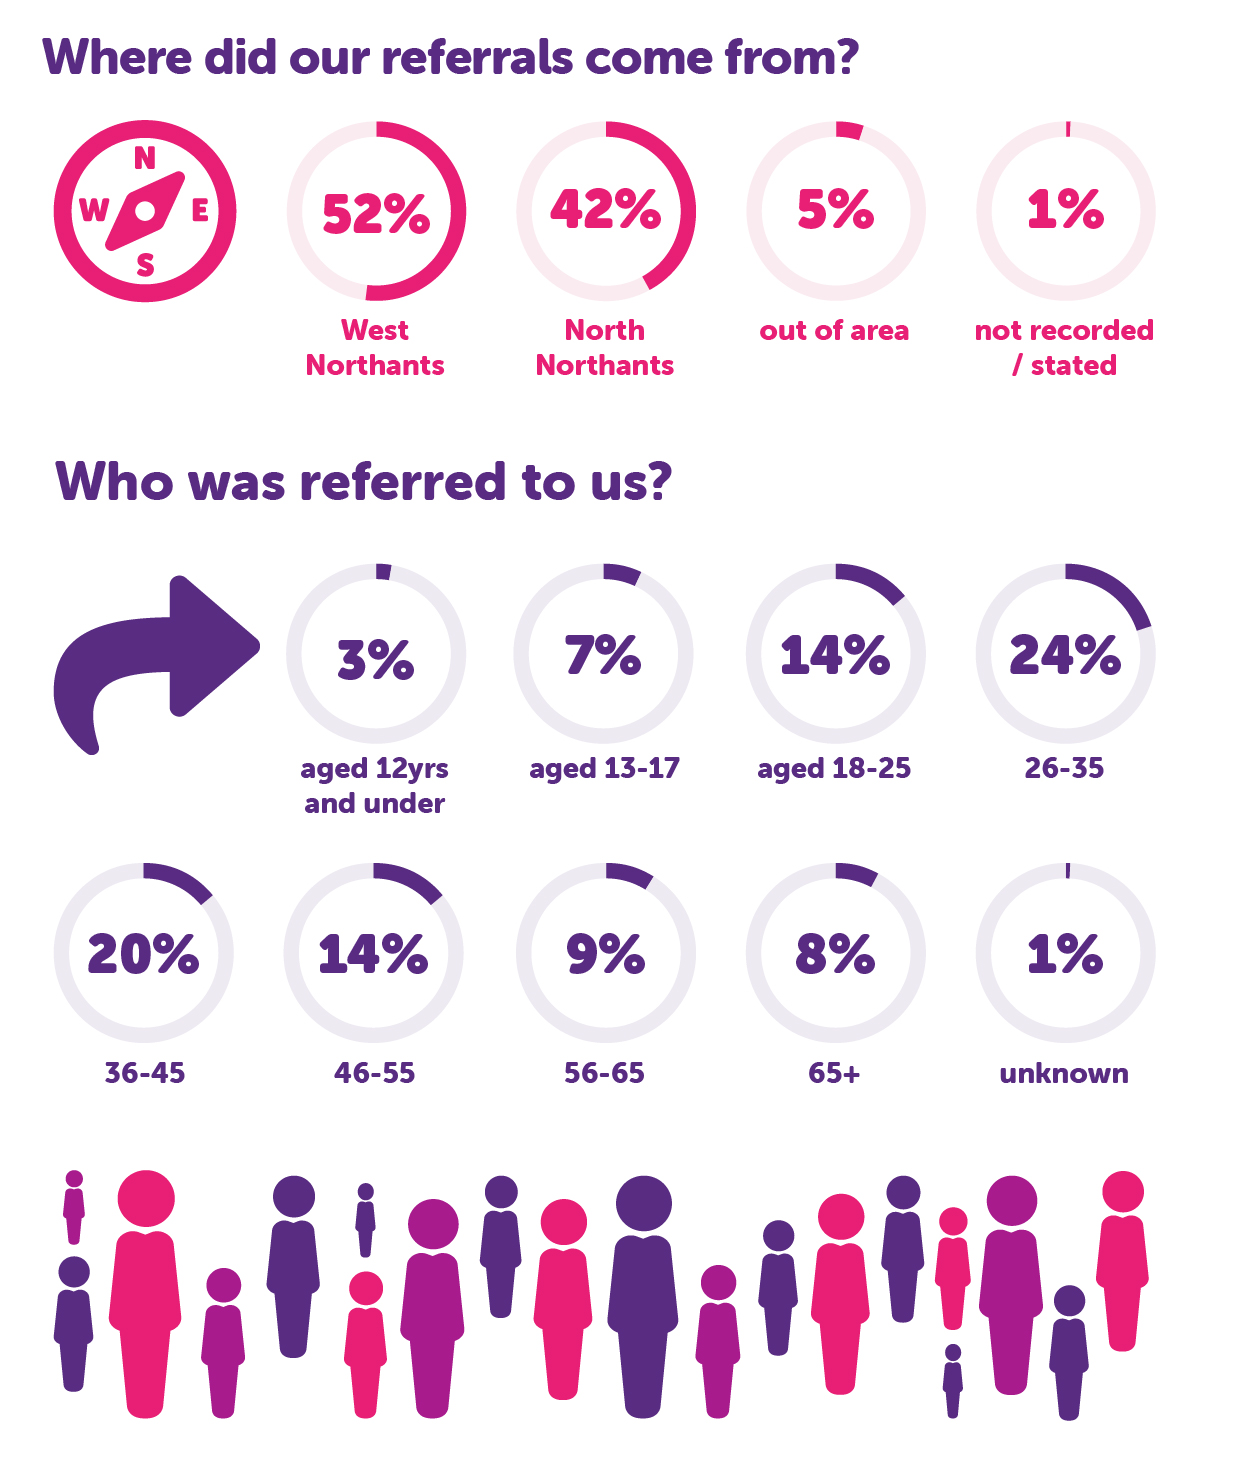 Where did our referrals come from? 52% West Northants 42% North Northants 5% out of area 1% not recorded/stated Who was referred to us? 3% aged 12yrs and under 7% aged 13-17 14% aged 18-25 24% 26-35 20% 36-45 14% 46-55 9% 56-65 8%65+ 1% unknown